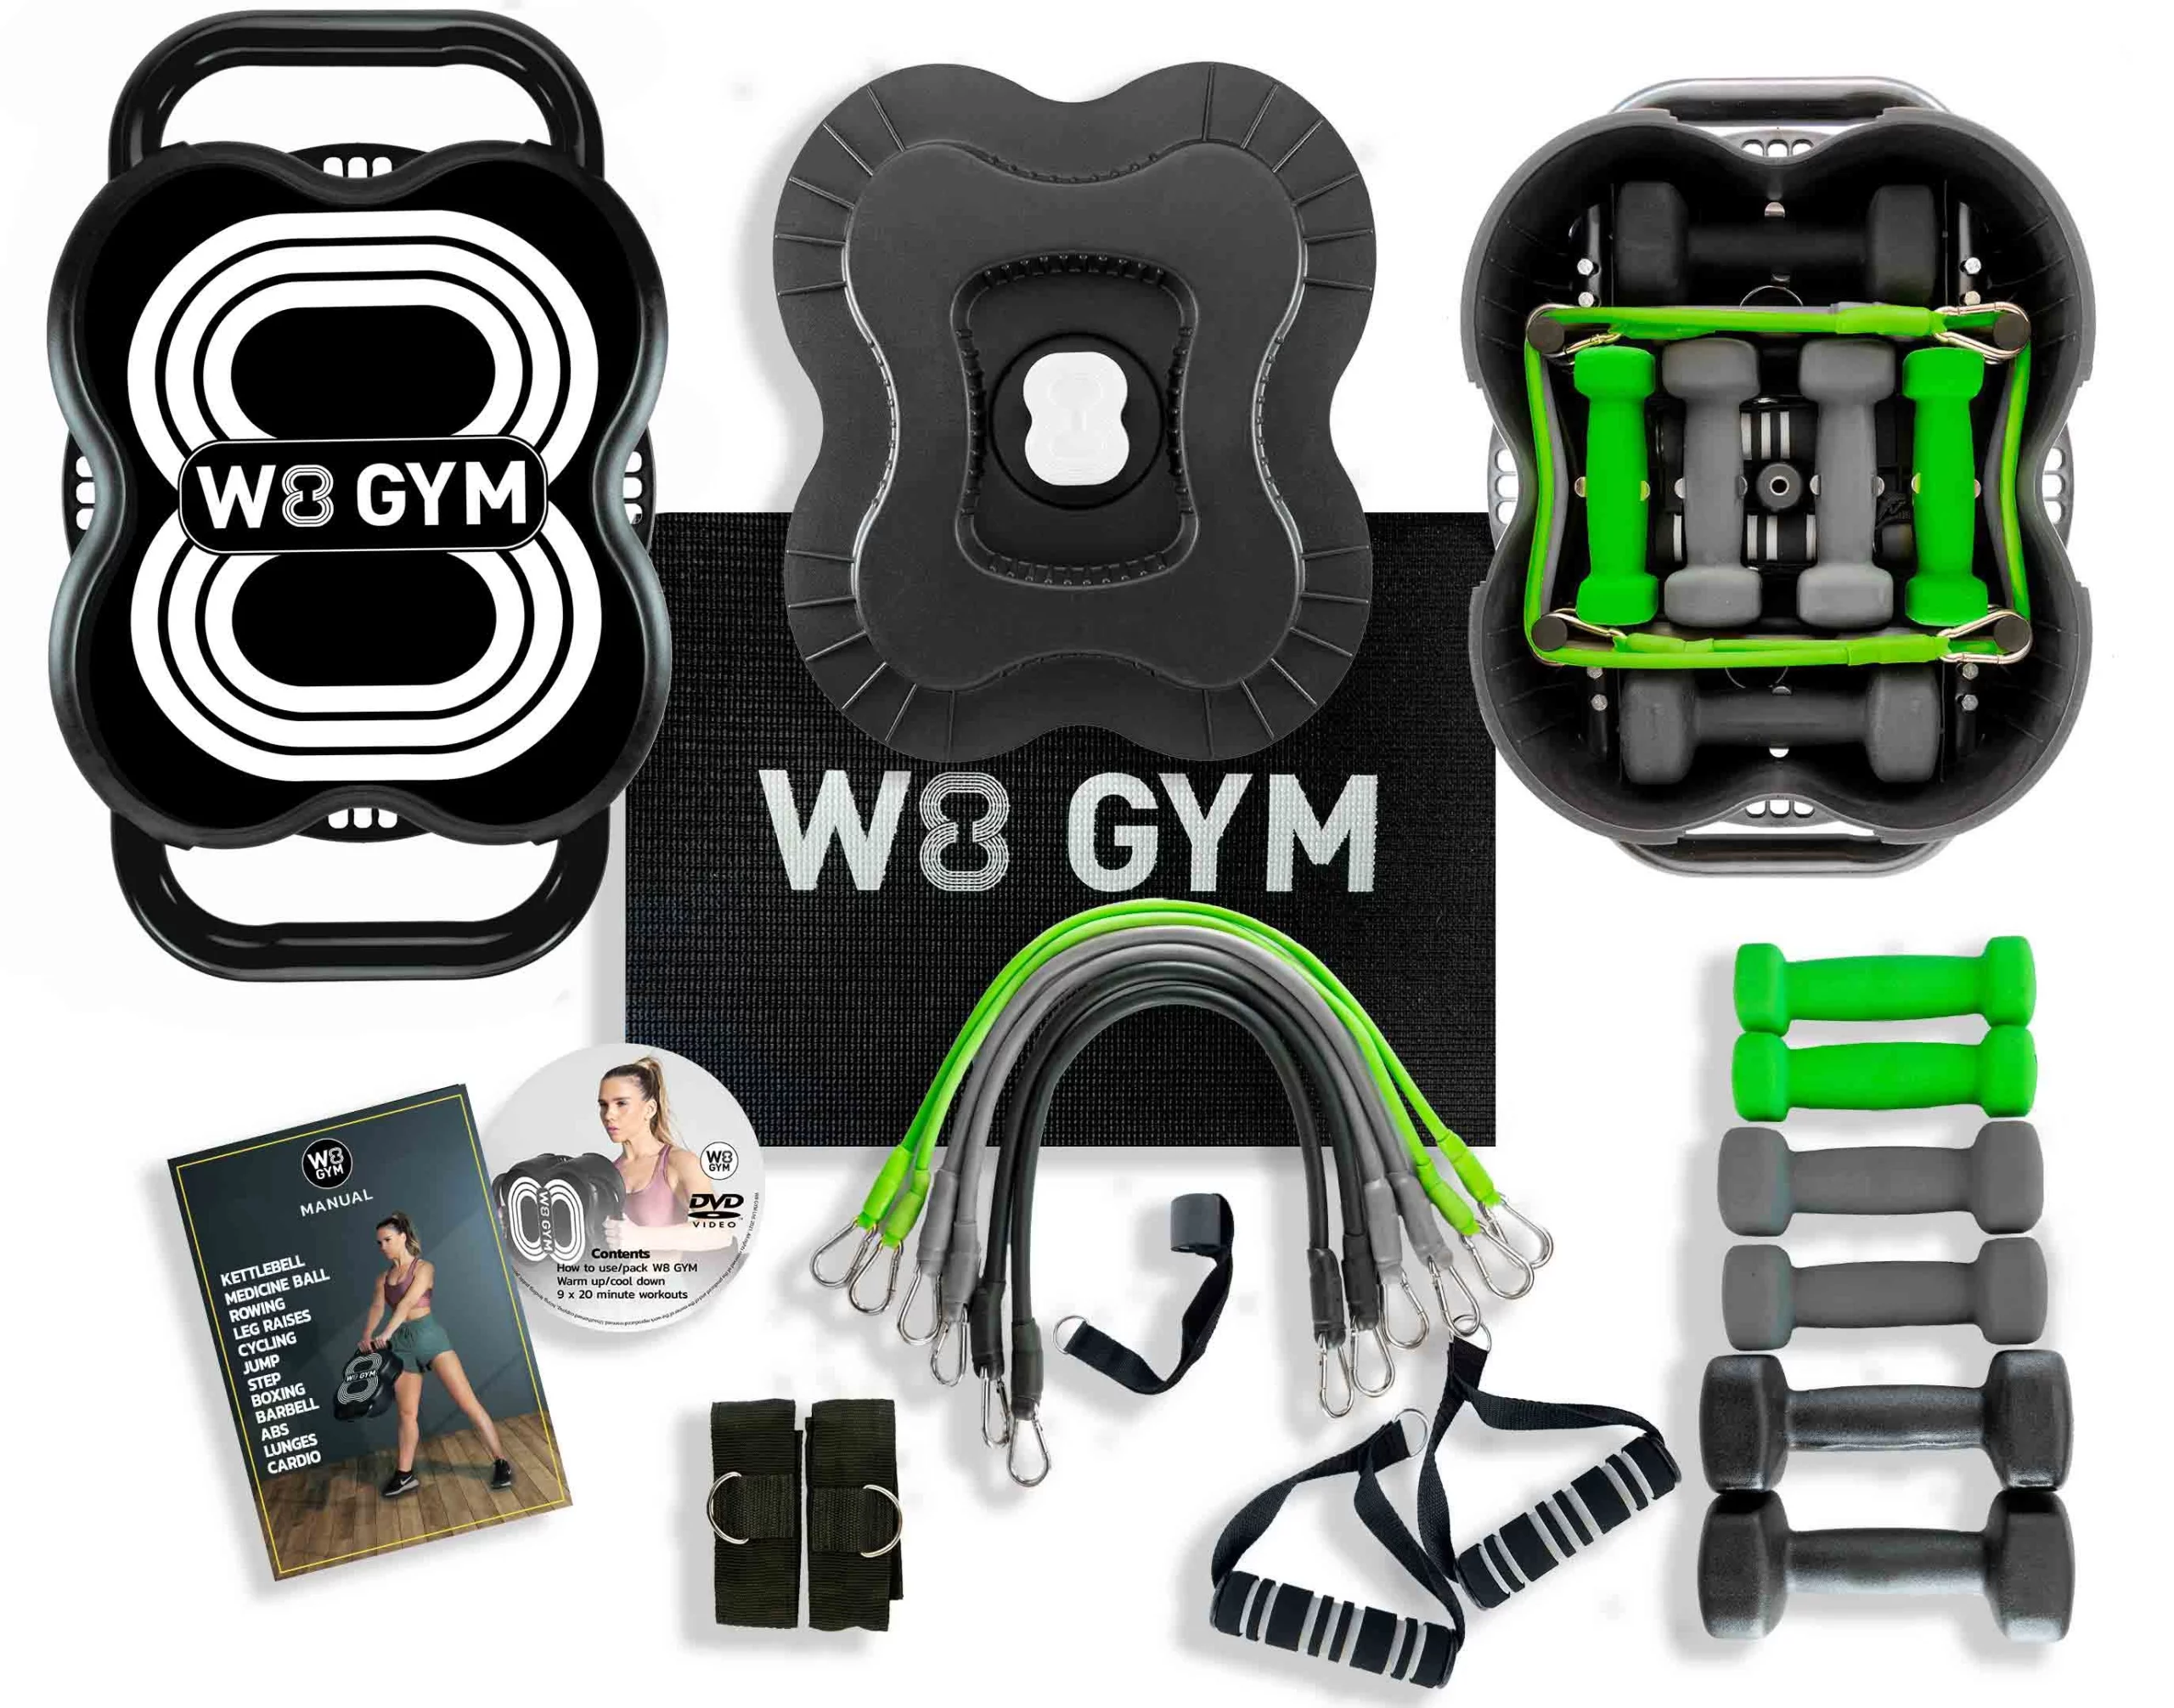 White Contents Displayed scaled - W8 GYM